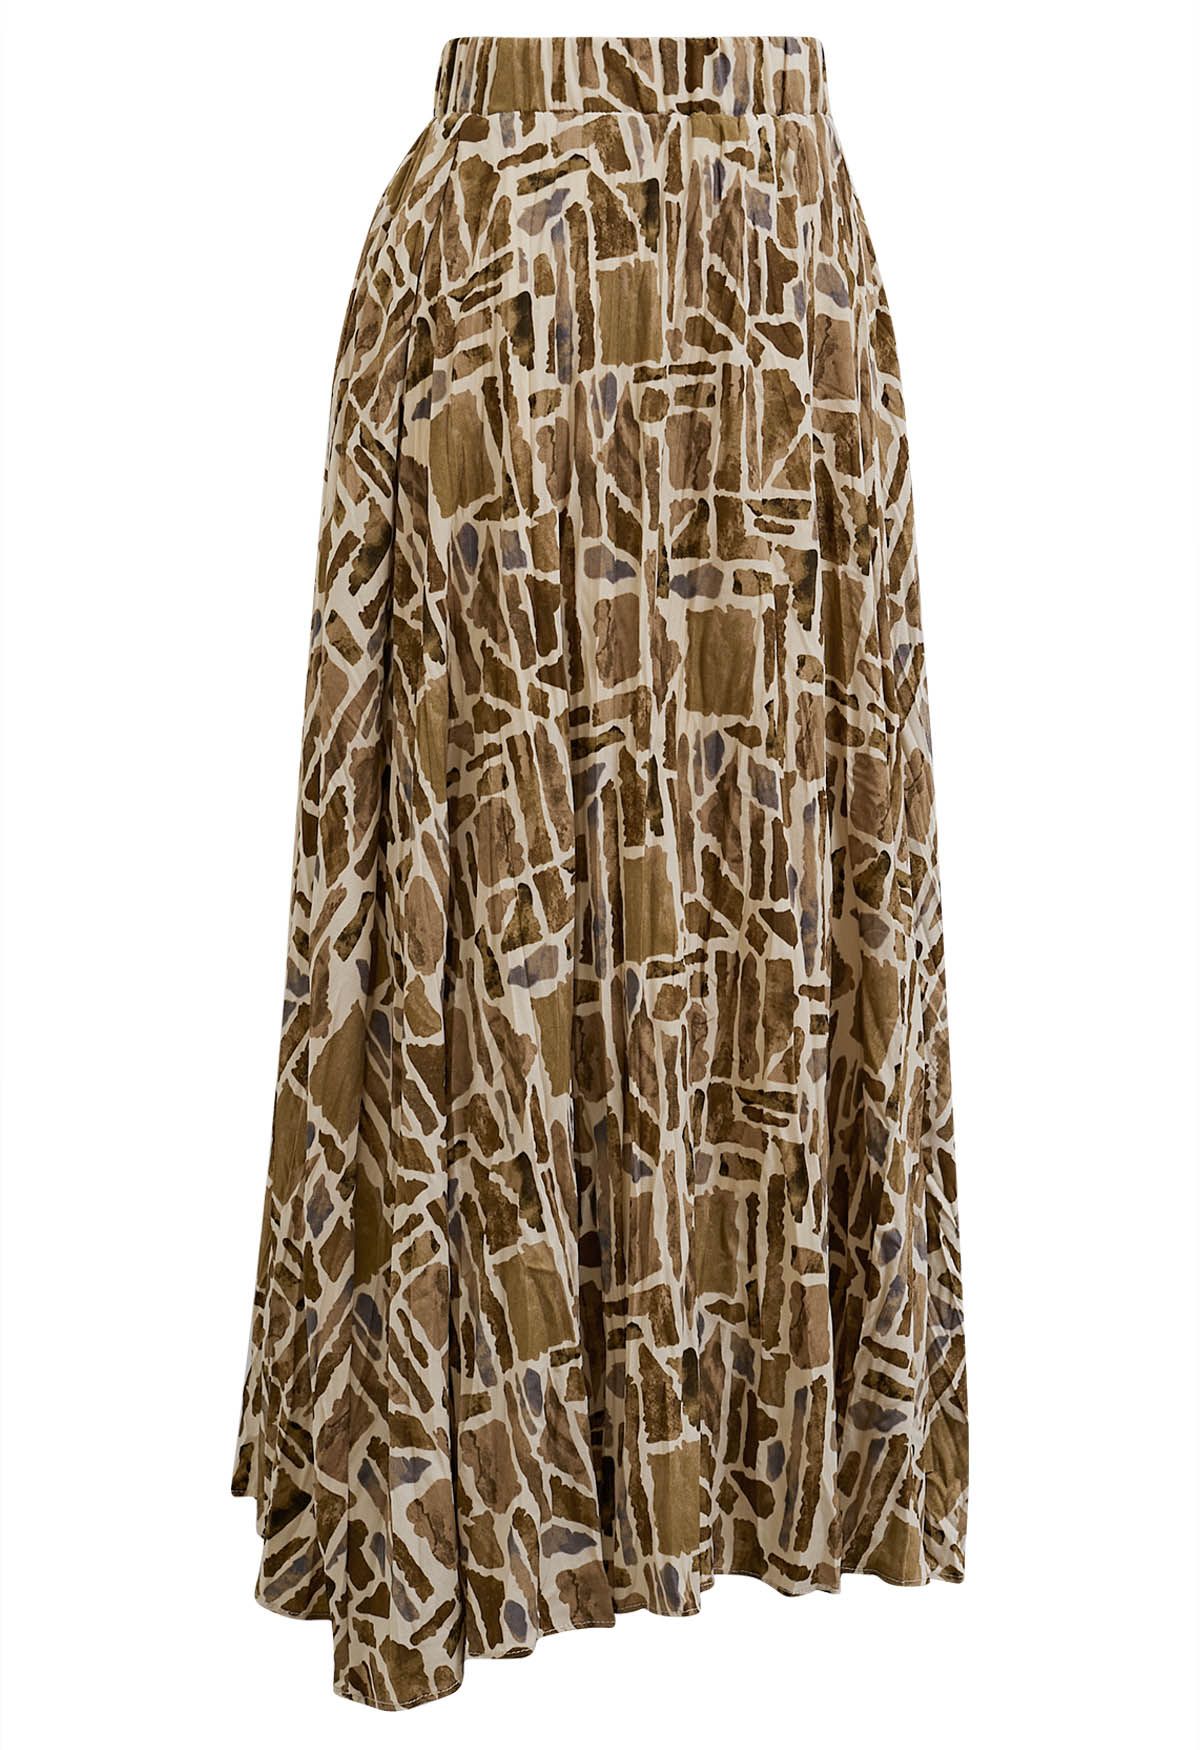 Graphic Printed Midi Skirt in Camel